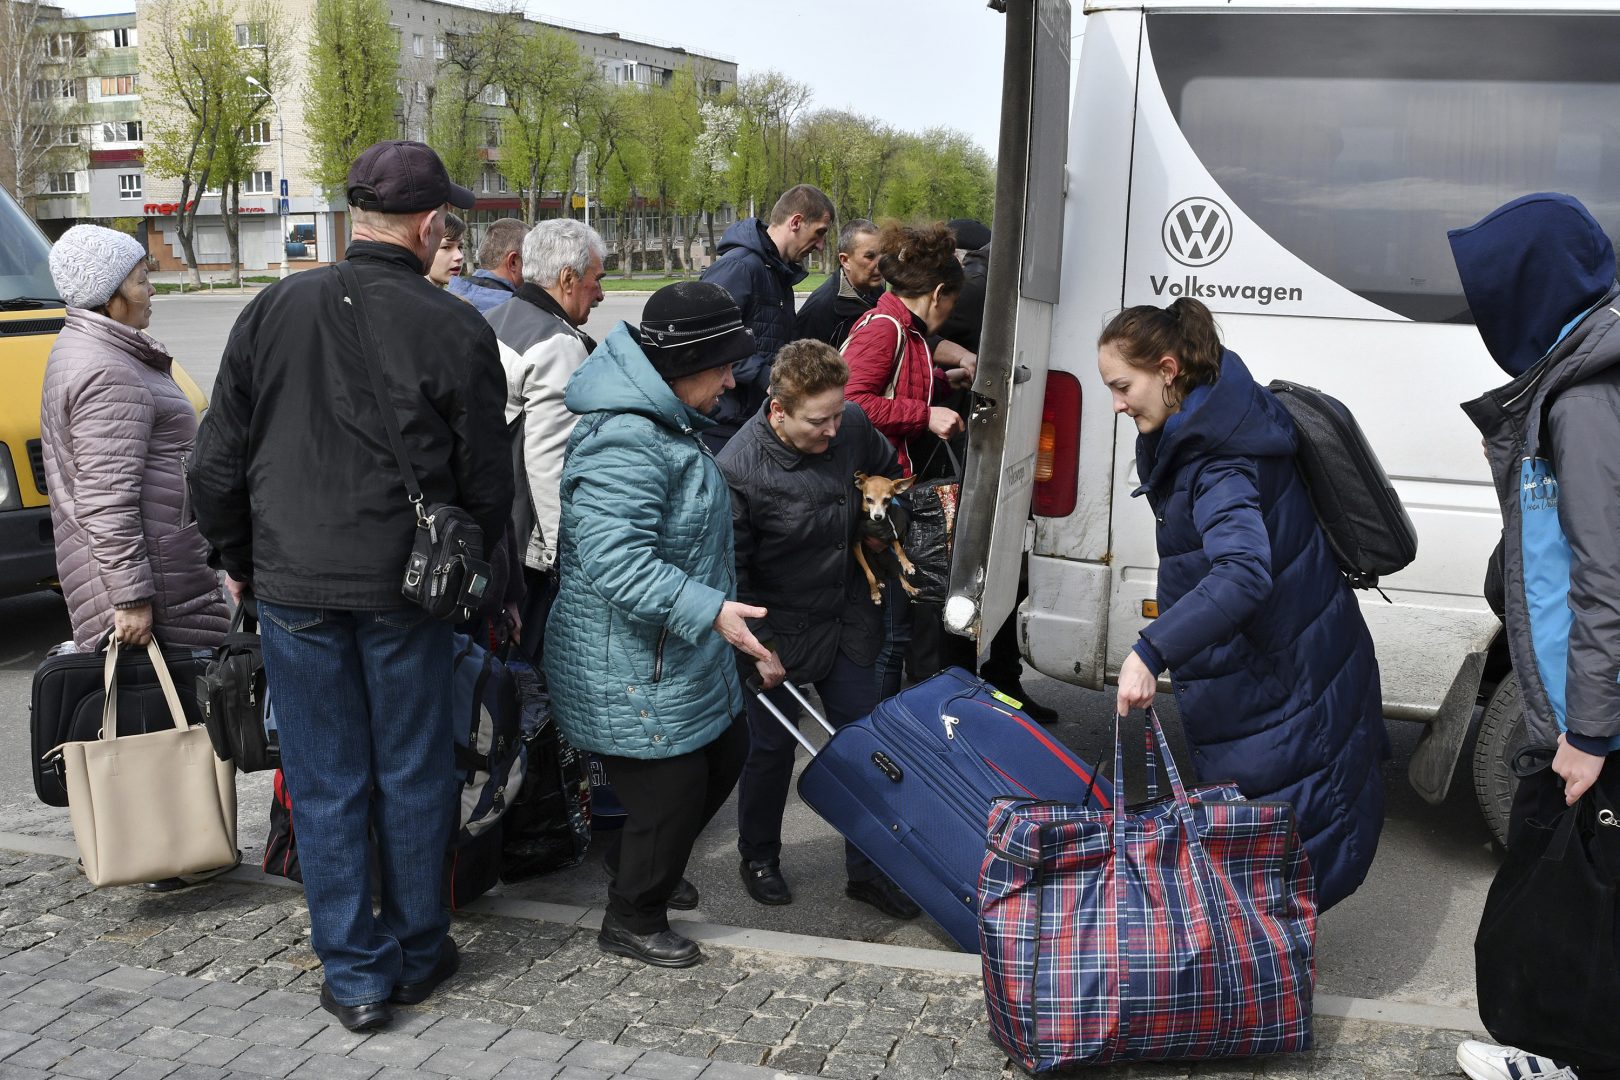 People board transport to move to Ukrainian city of Dnipro during an evacuation of civilians in Kramatorsk, Ukraine, Tuesday, April 19, 2022.